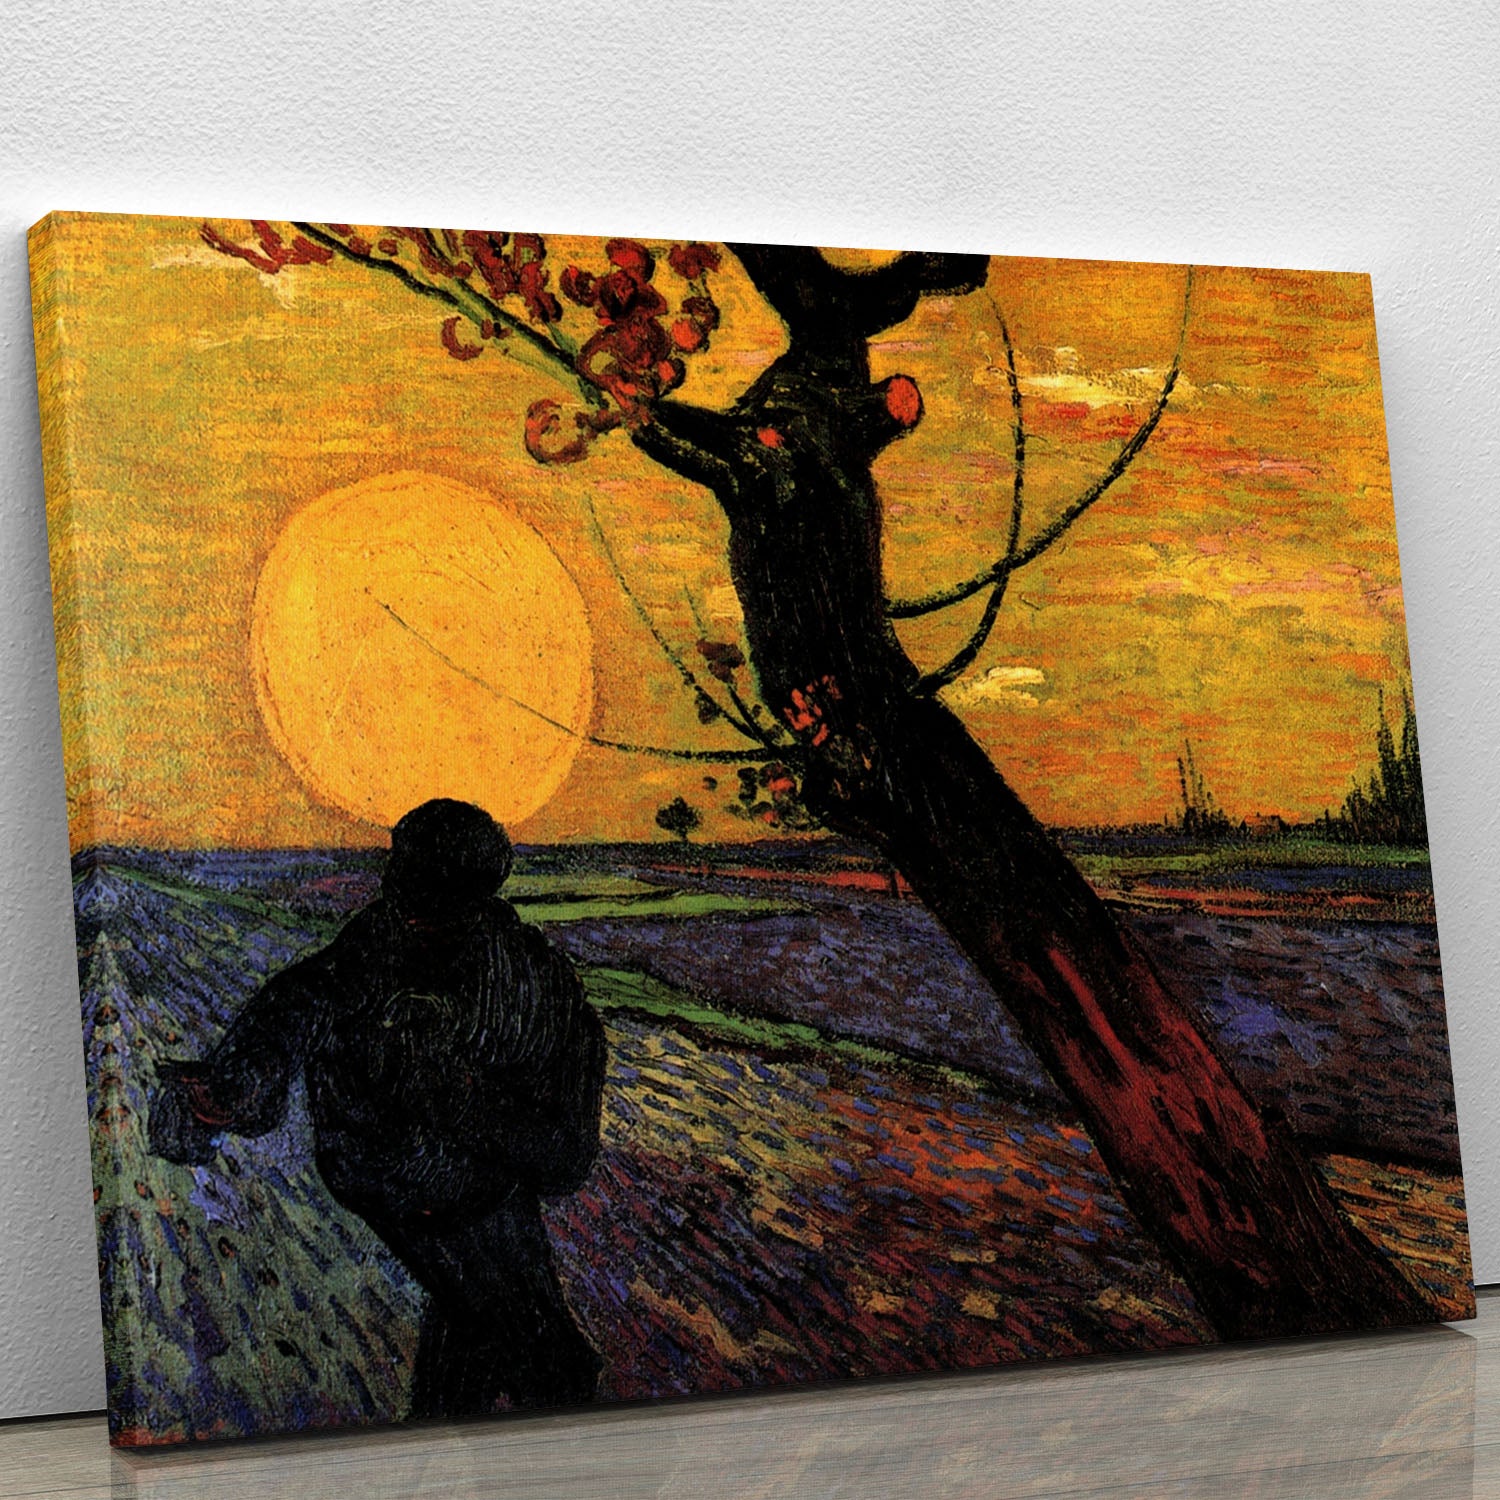 The Sower 2 by Van Gogh Canvas Print or Poster - Canvas Art Rocks - 1